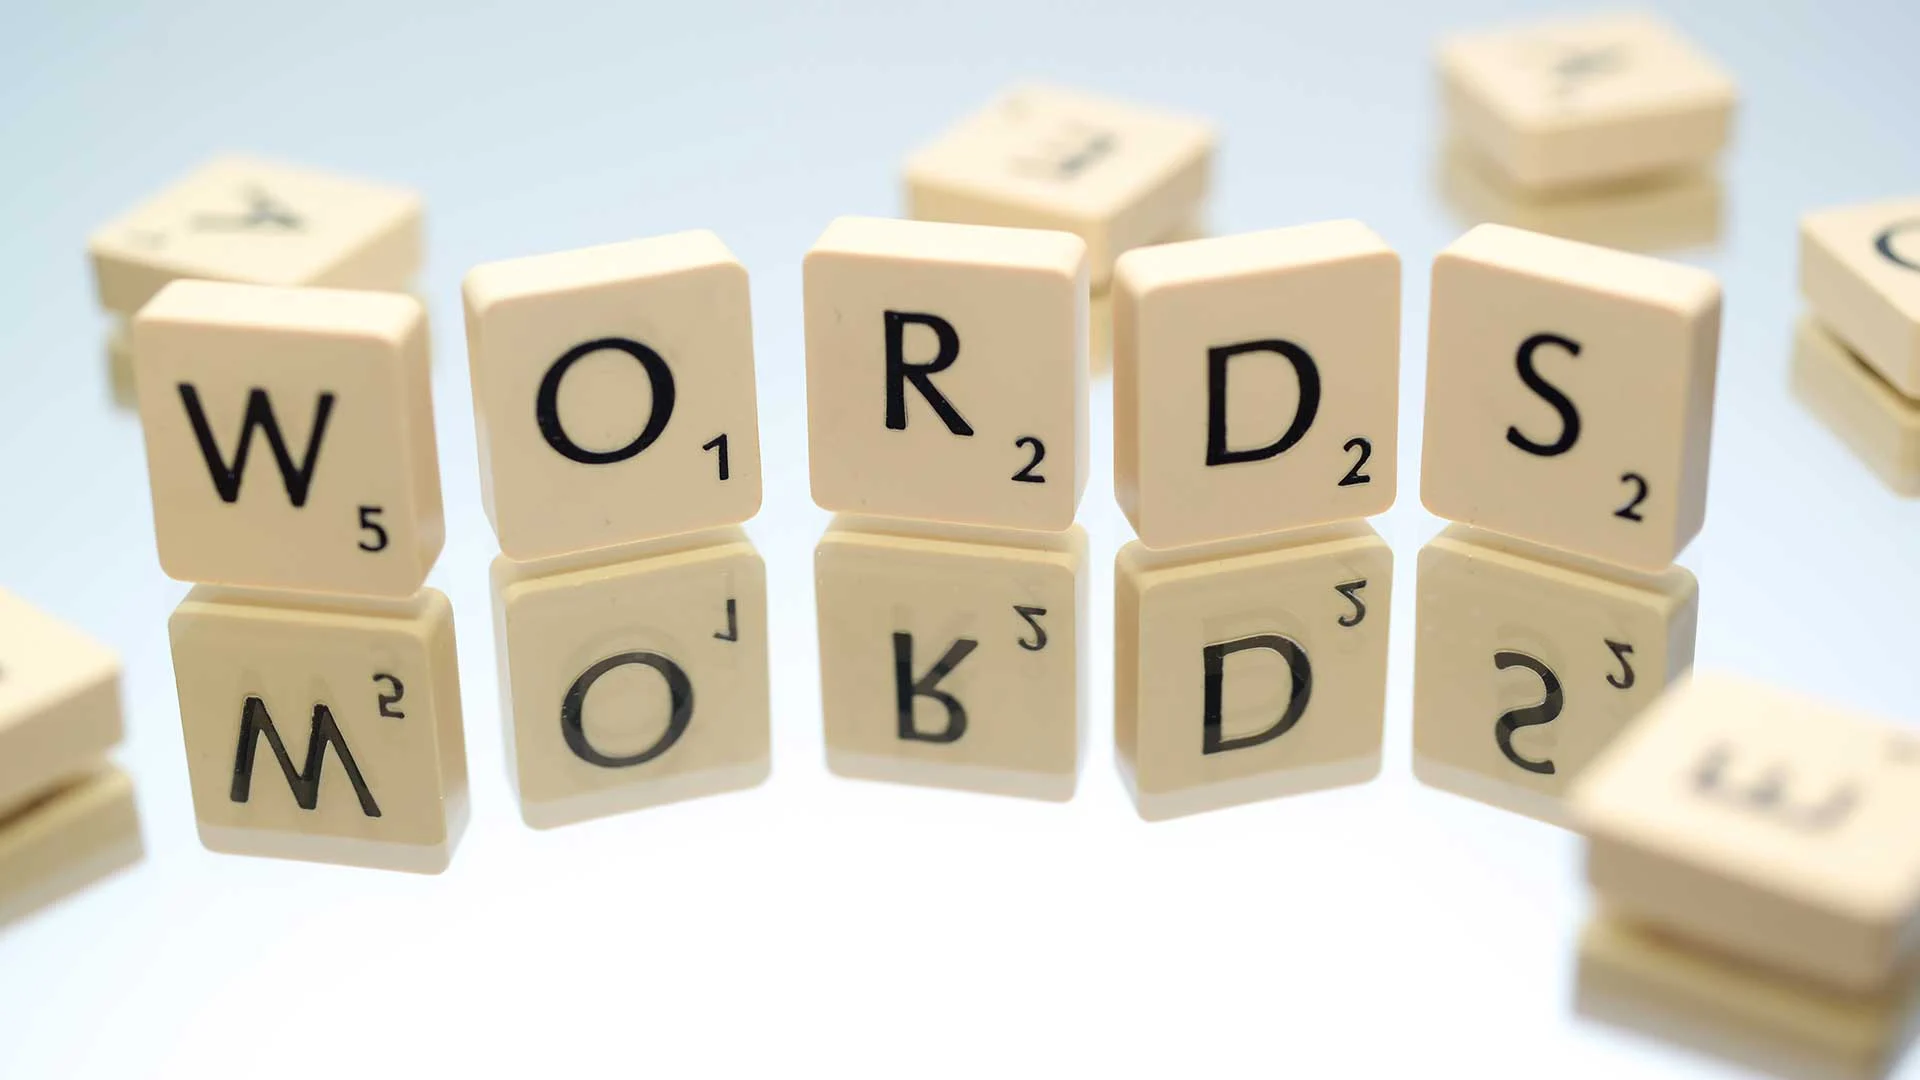 5 Letter Words With Ora In The Middle